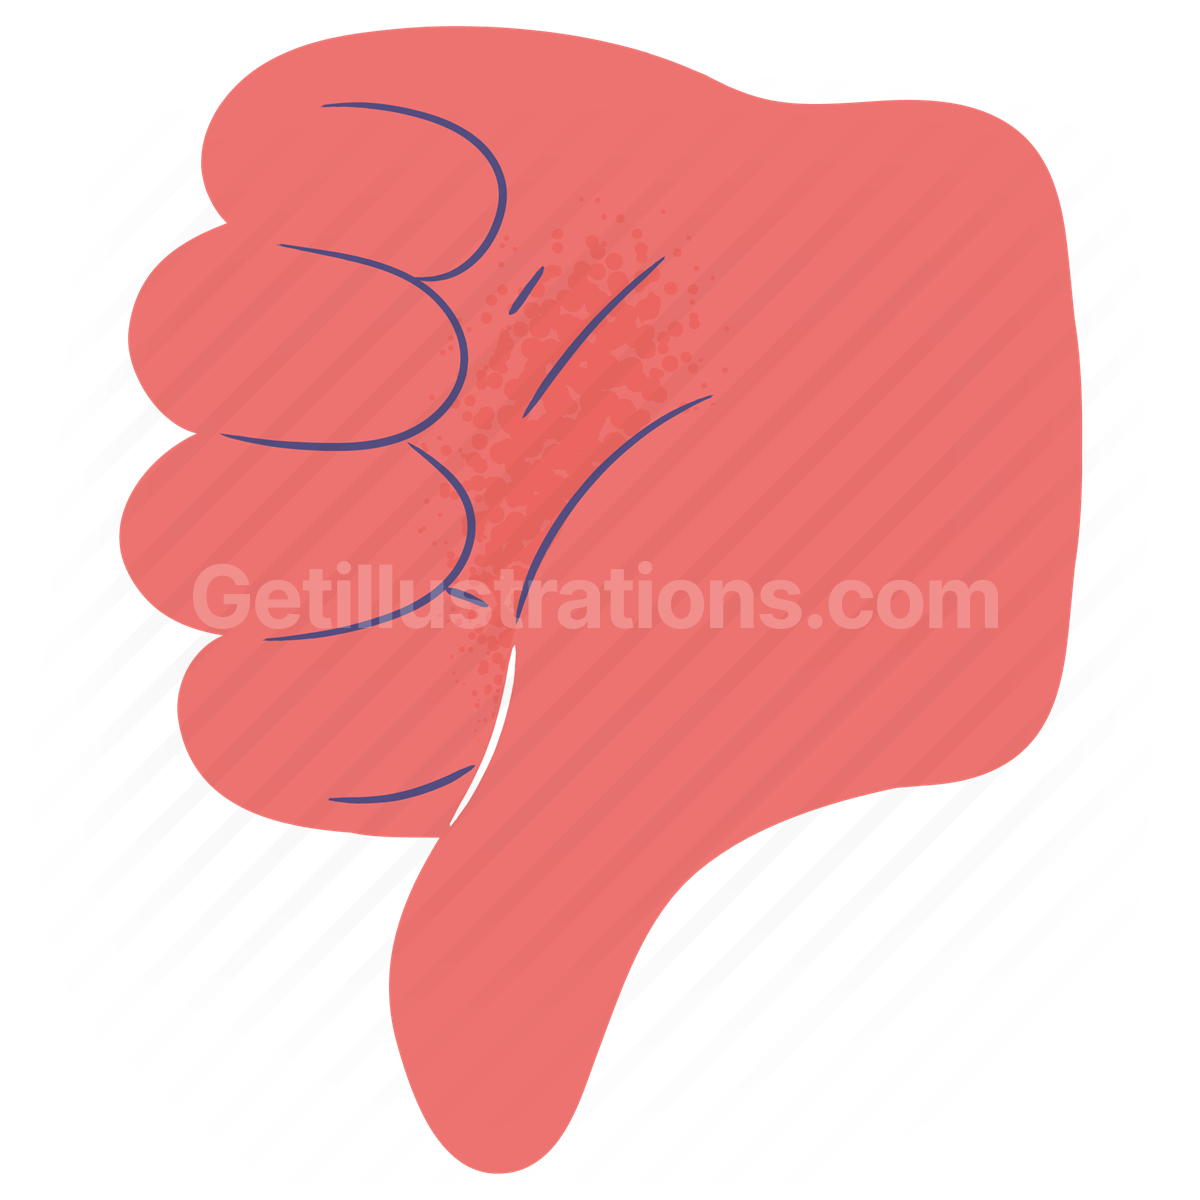 hand gesture, gesture, hand, sign, language, letters, alphabet, thumbs down